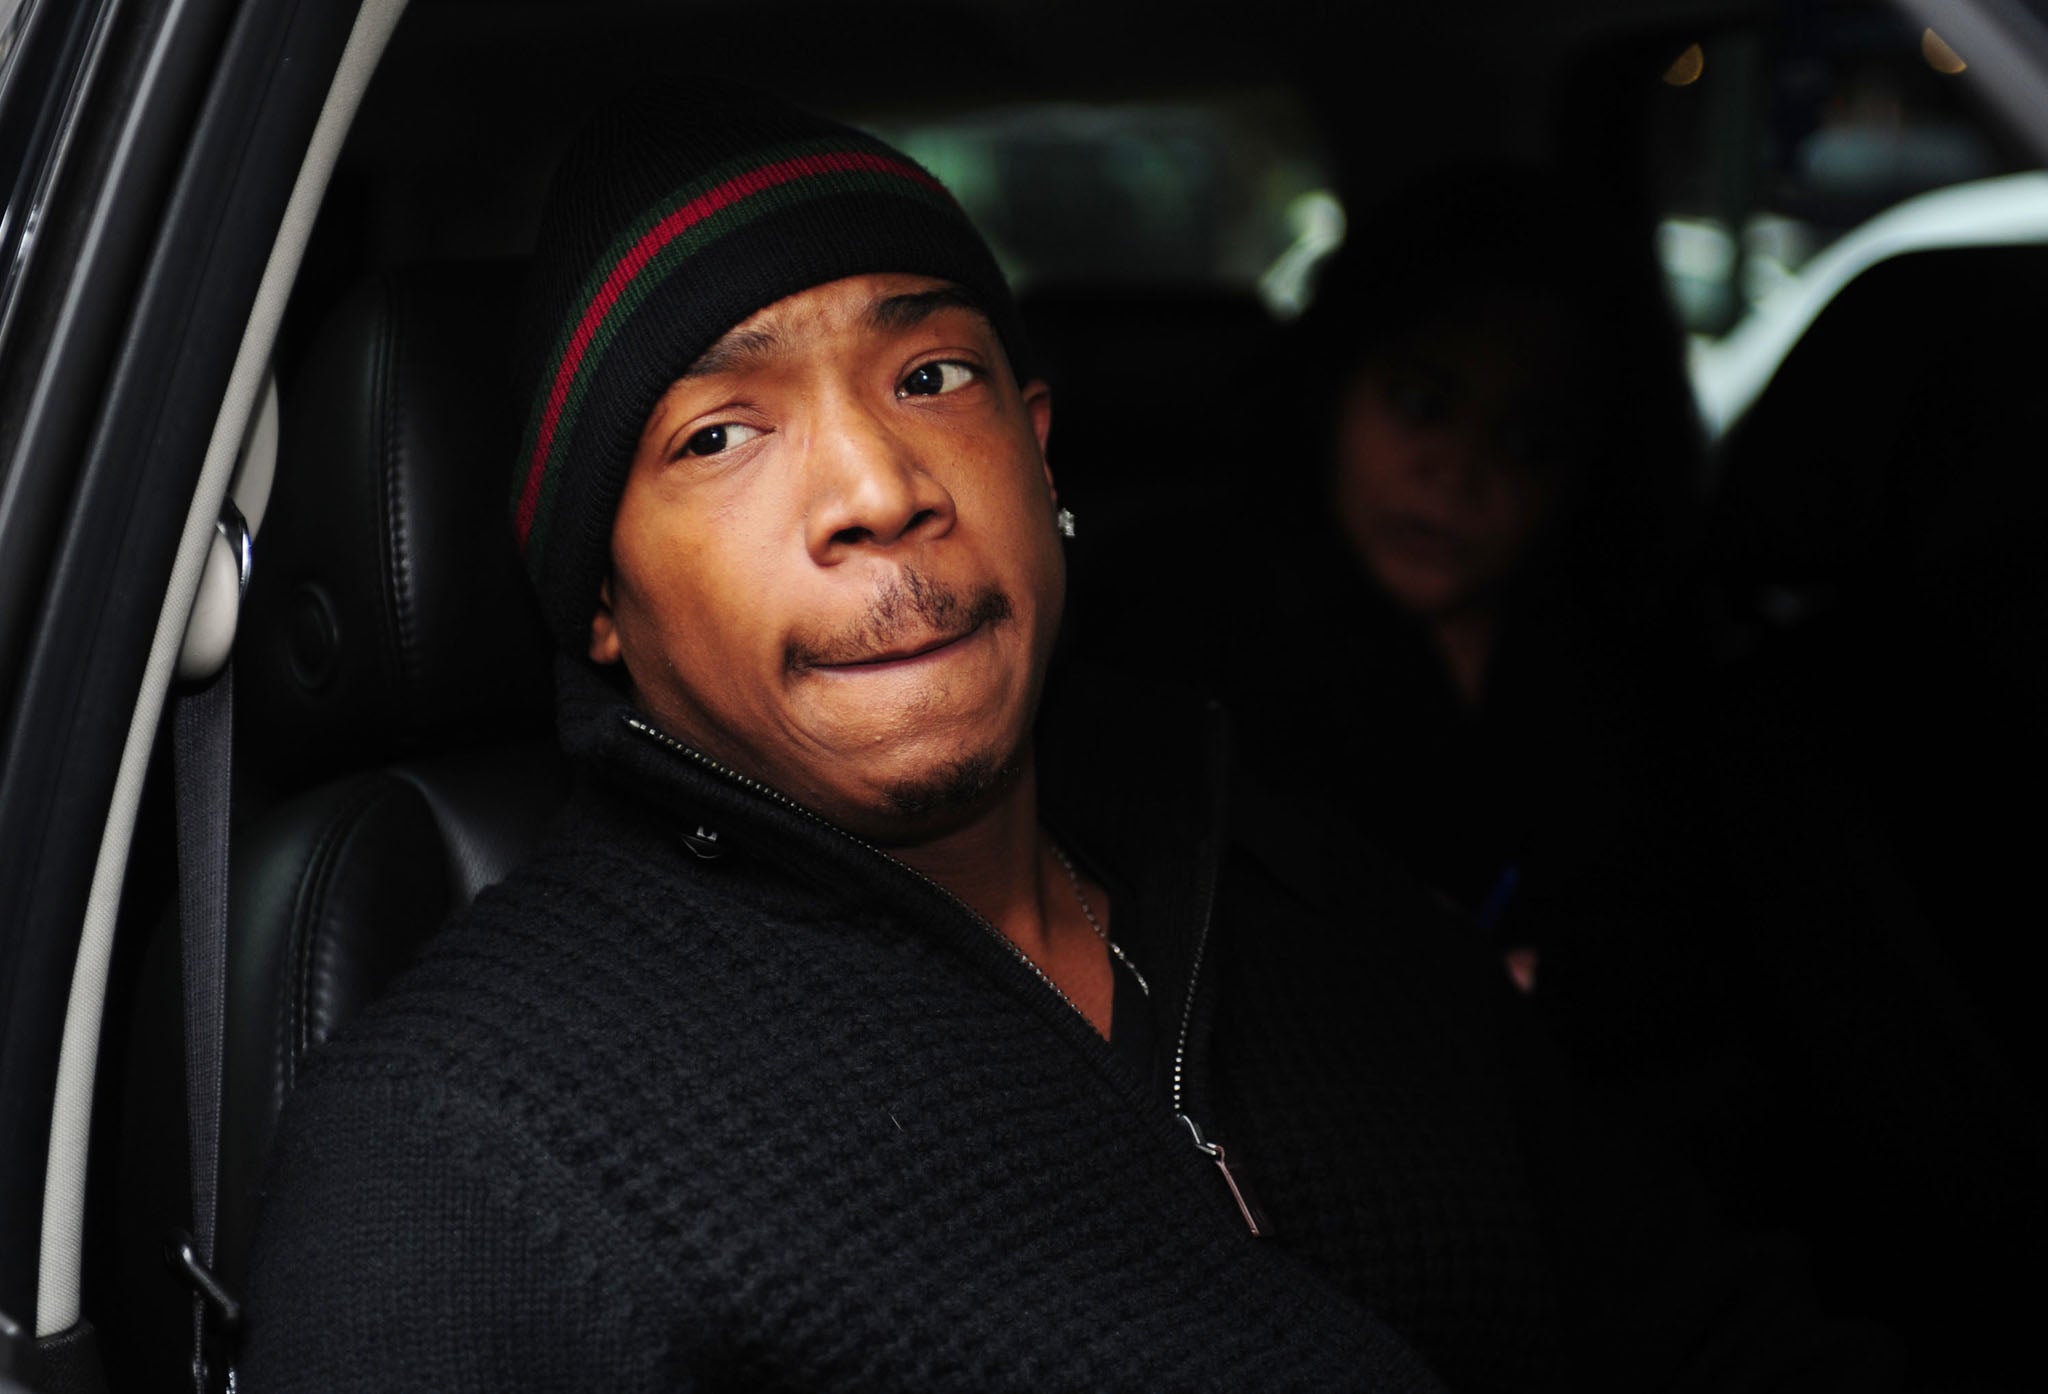 Ja Rule's denial comes years after he was publicly lambasted for making homophobic comments in an interview in 2007